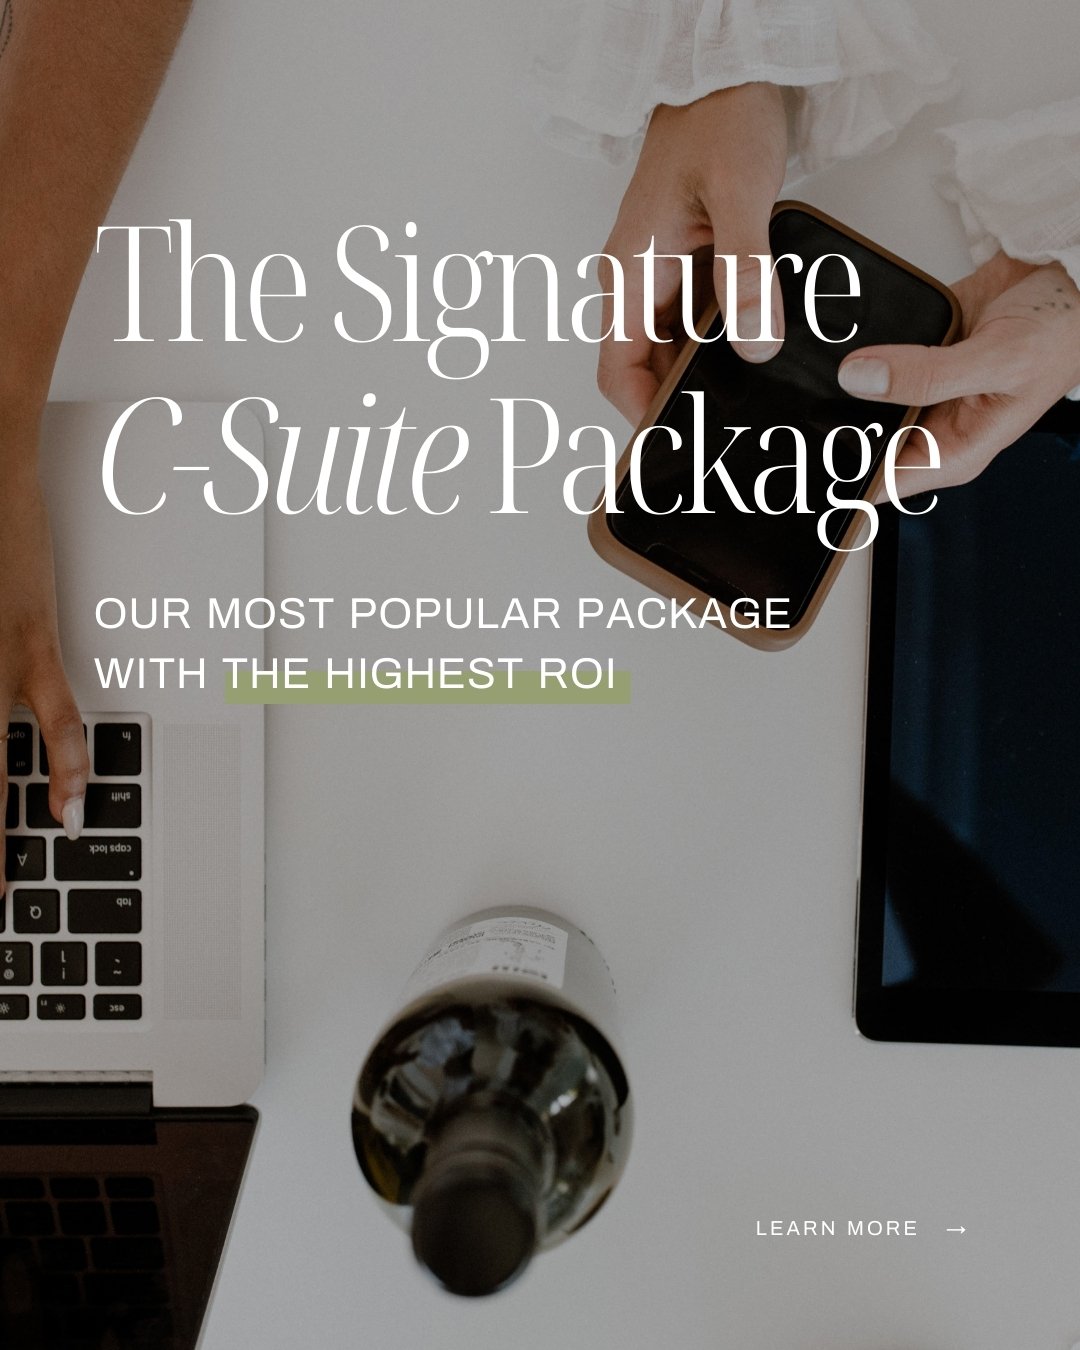 A VIP custom design experience that generates ROI, drives top-dollar clients, and showcases you as &ldquo;THE&rdquo; leader in your field? 

Say less.

Our most popular offer, The Signature C-Suite Package, does just that! Tailored specifically for a